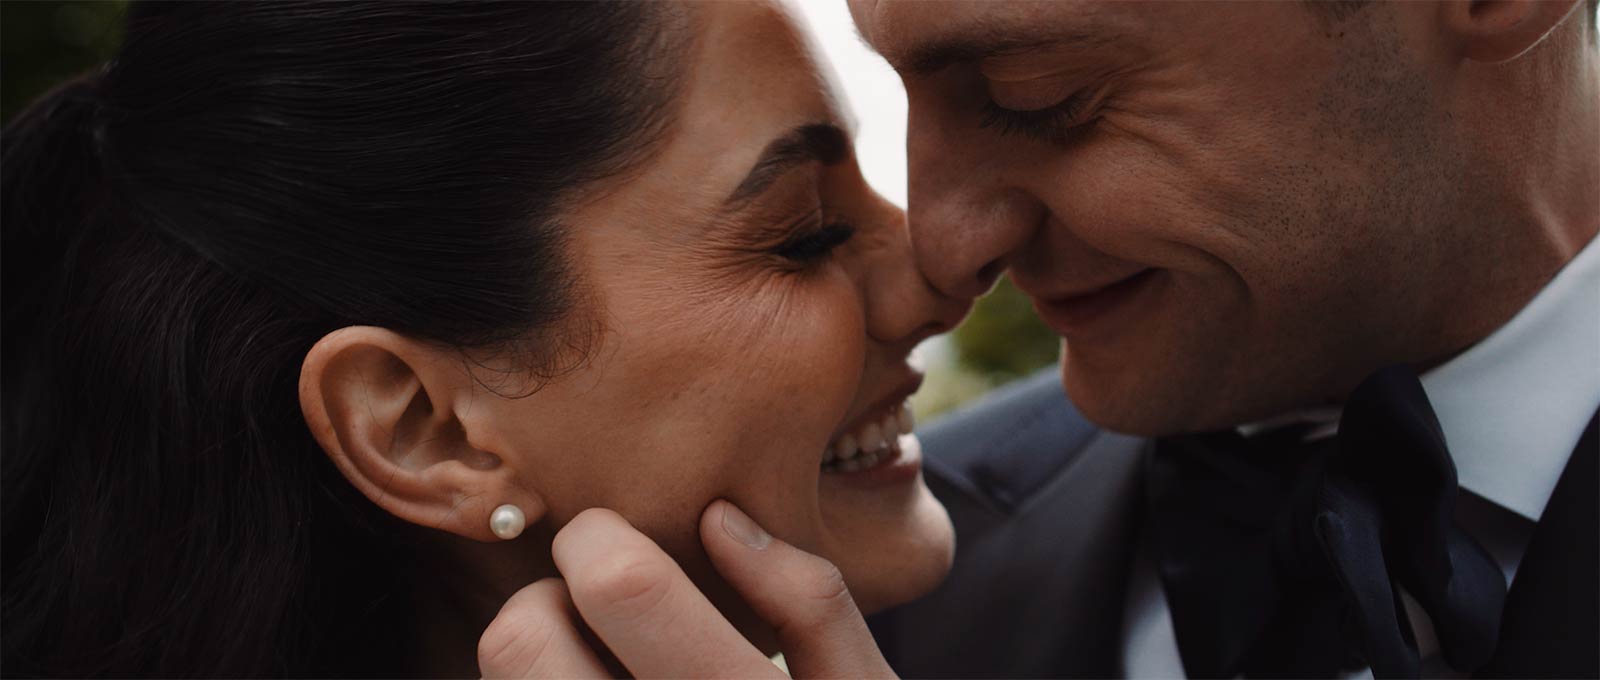 Smiling Wedding Couple Hold Each Other Close